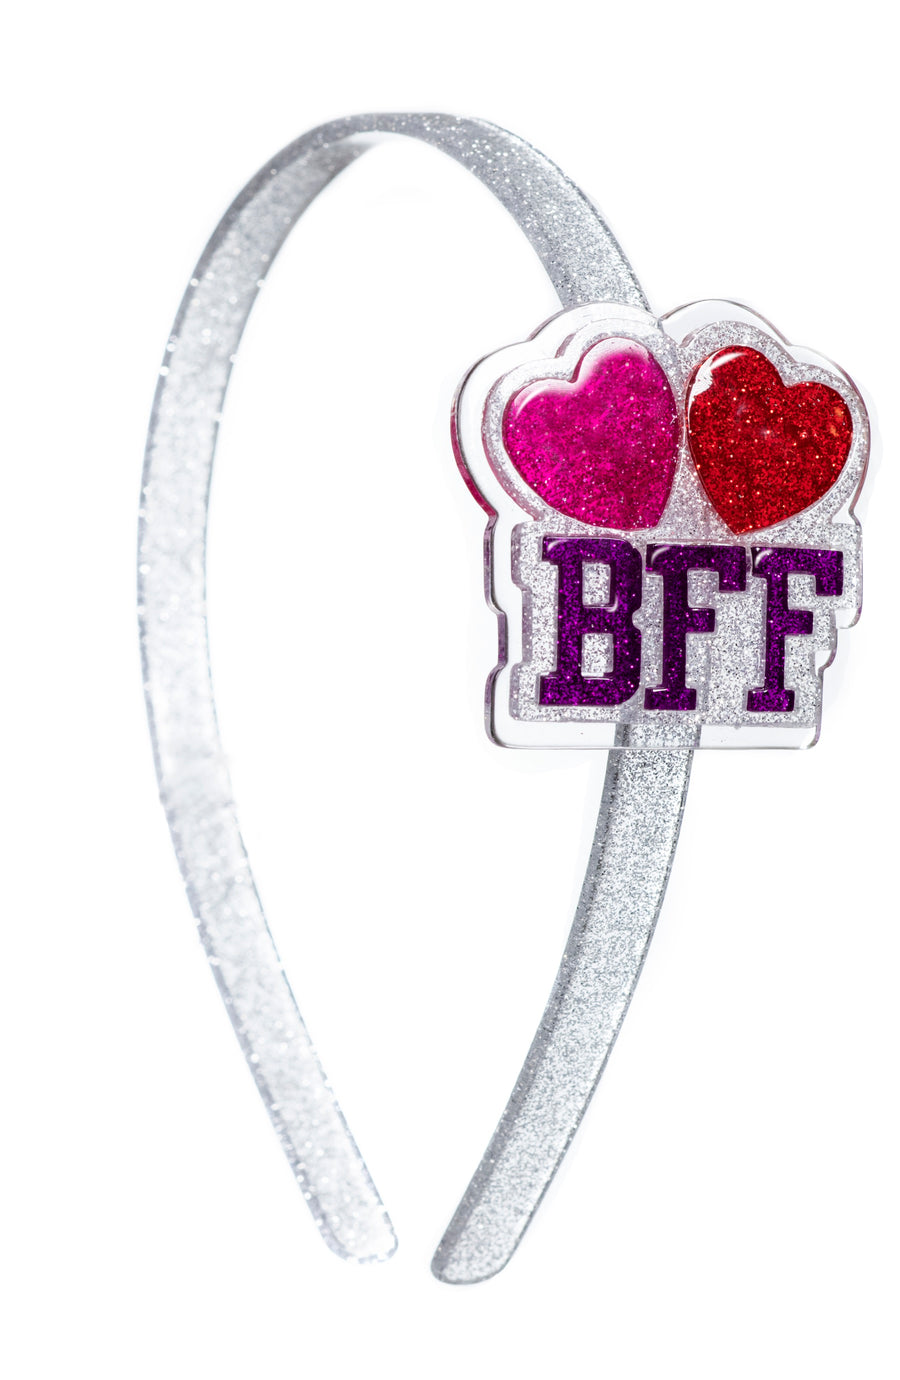 Lilies & Roses NY Silver Sparkle BFF (Best Friend Forever) Headband